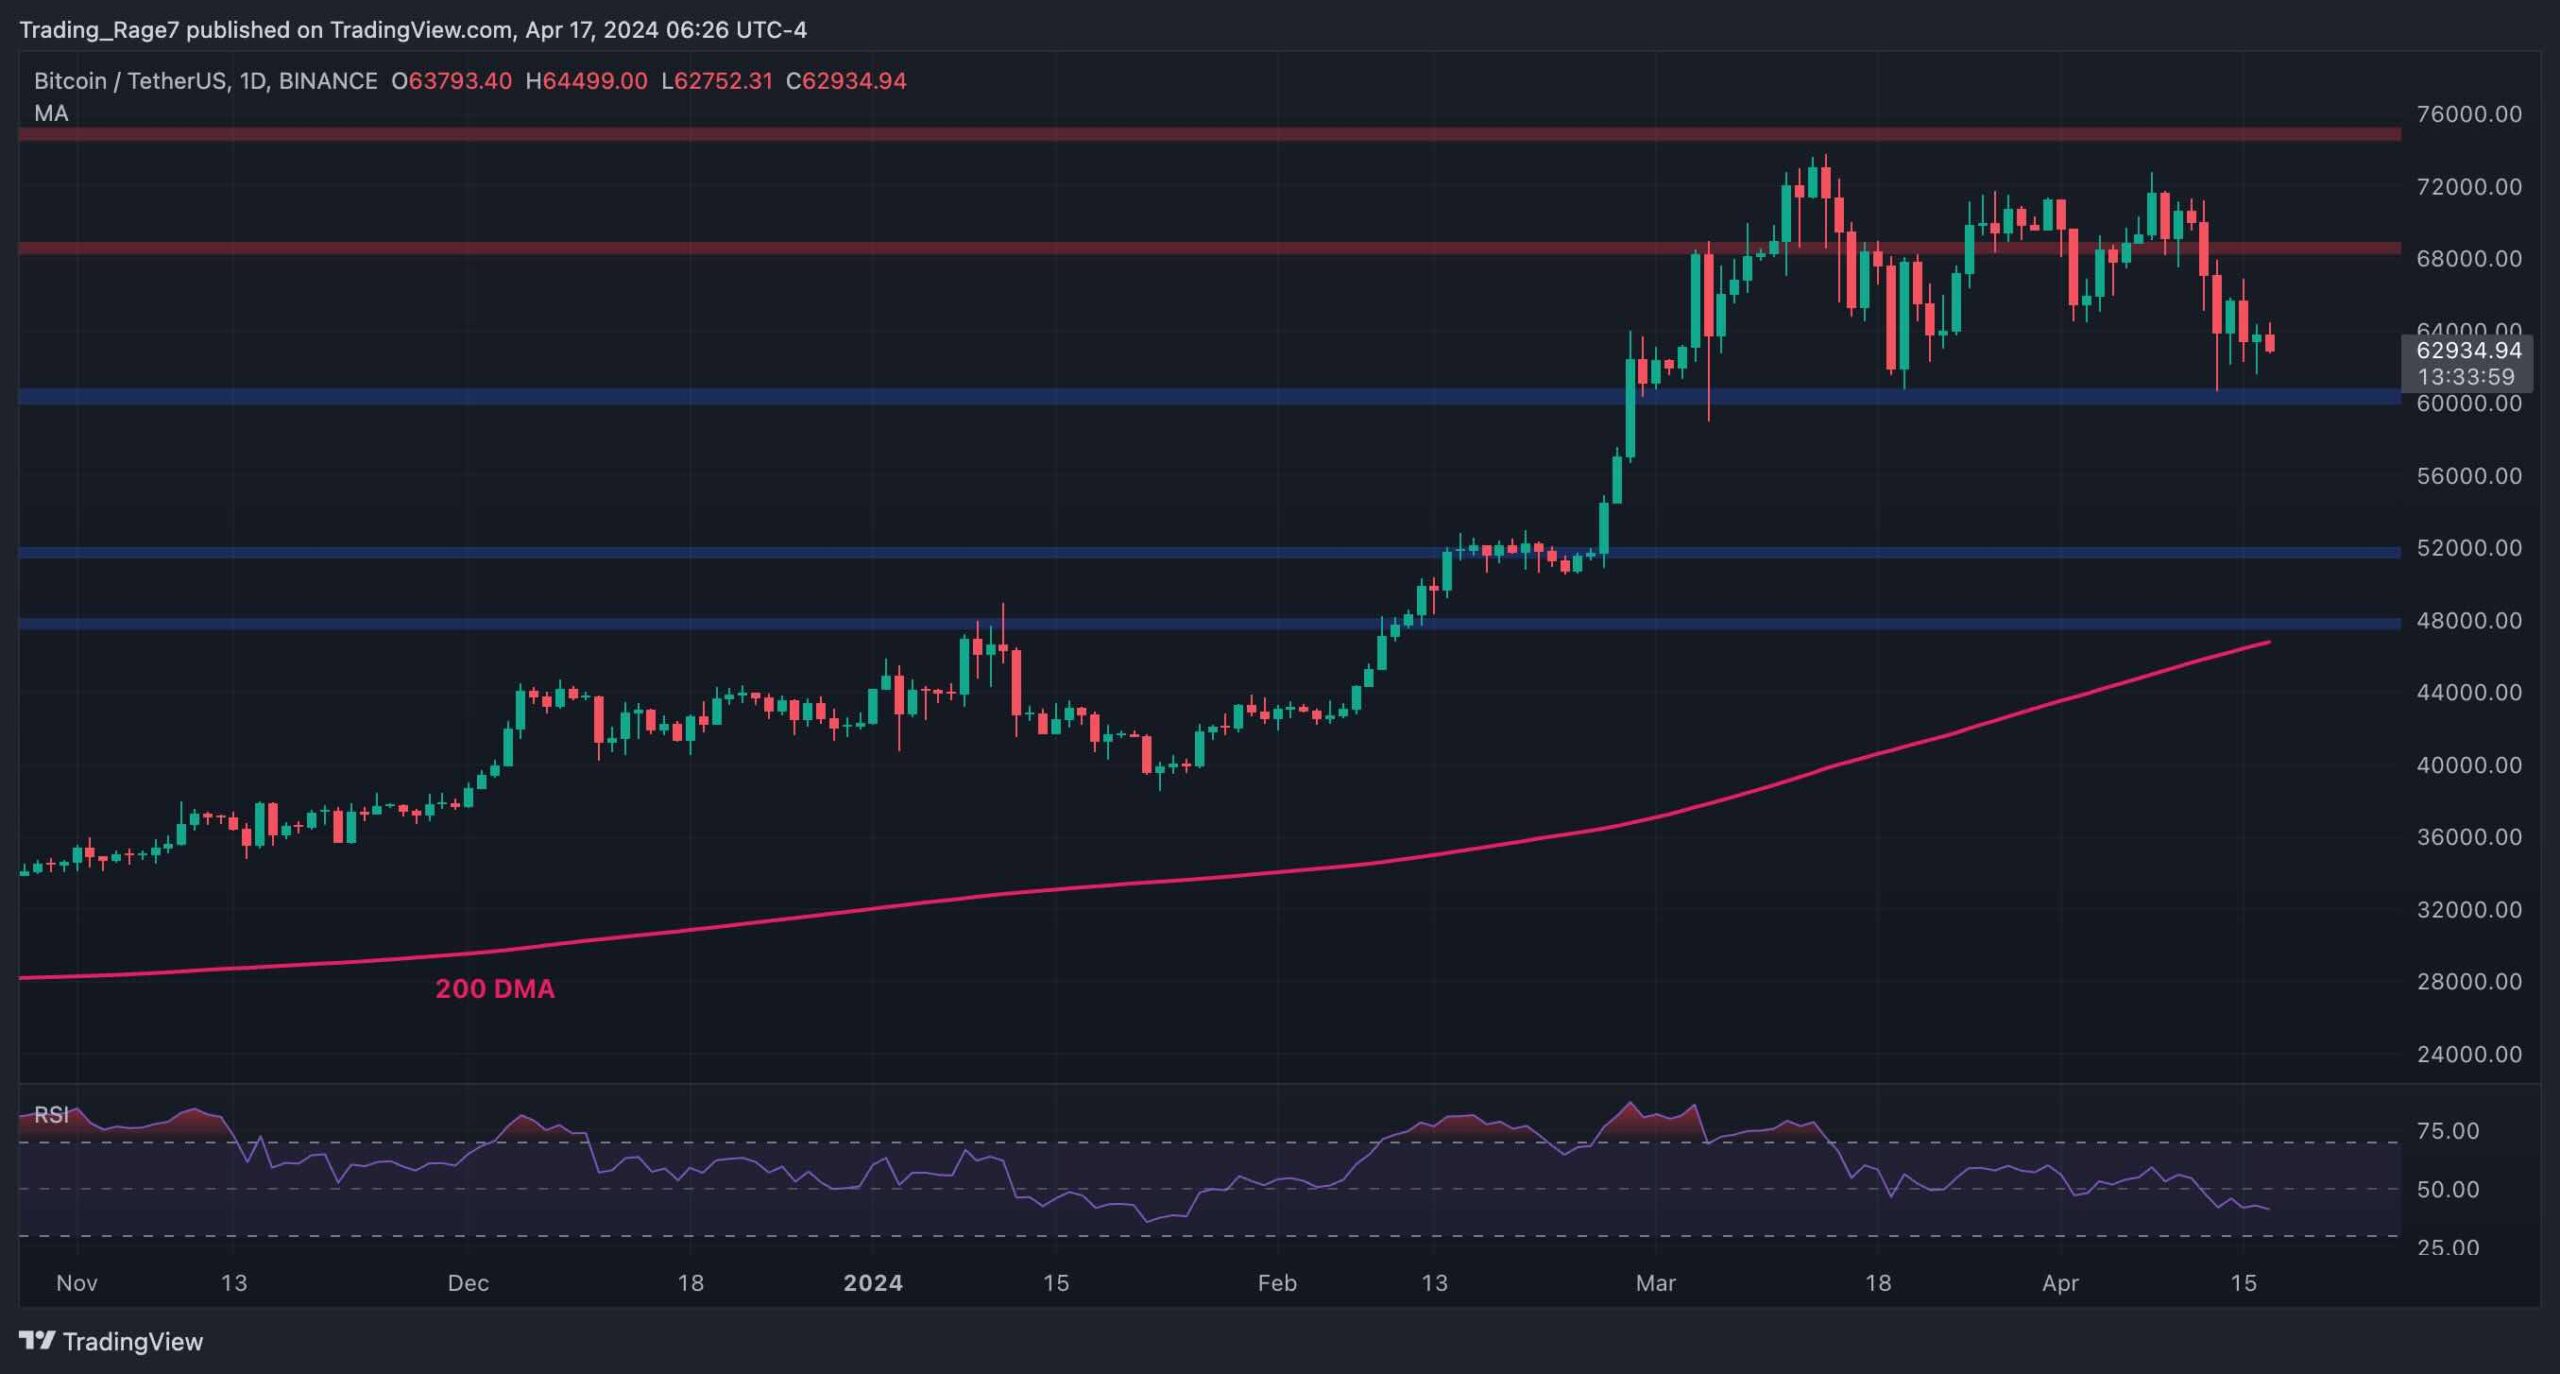 Bitcoin Price Analysis: Is Bitcoin About to Crash Below $60K or Stage a Recovery?